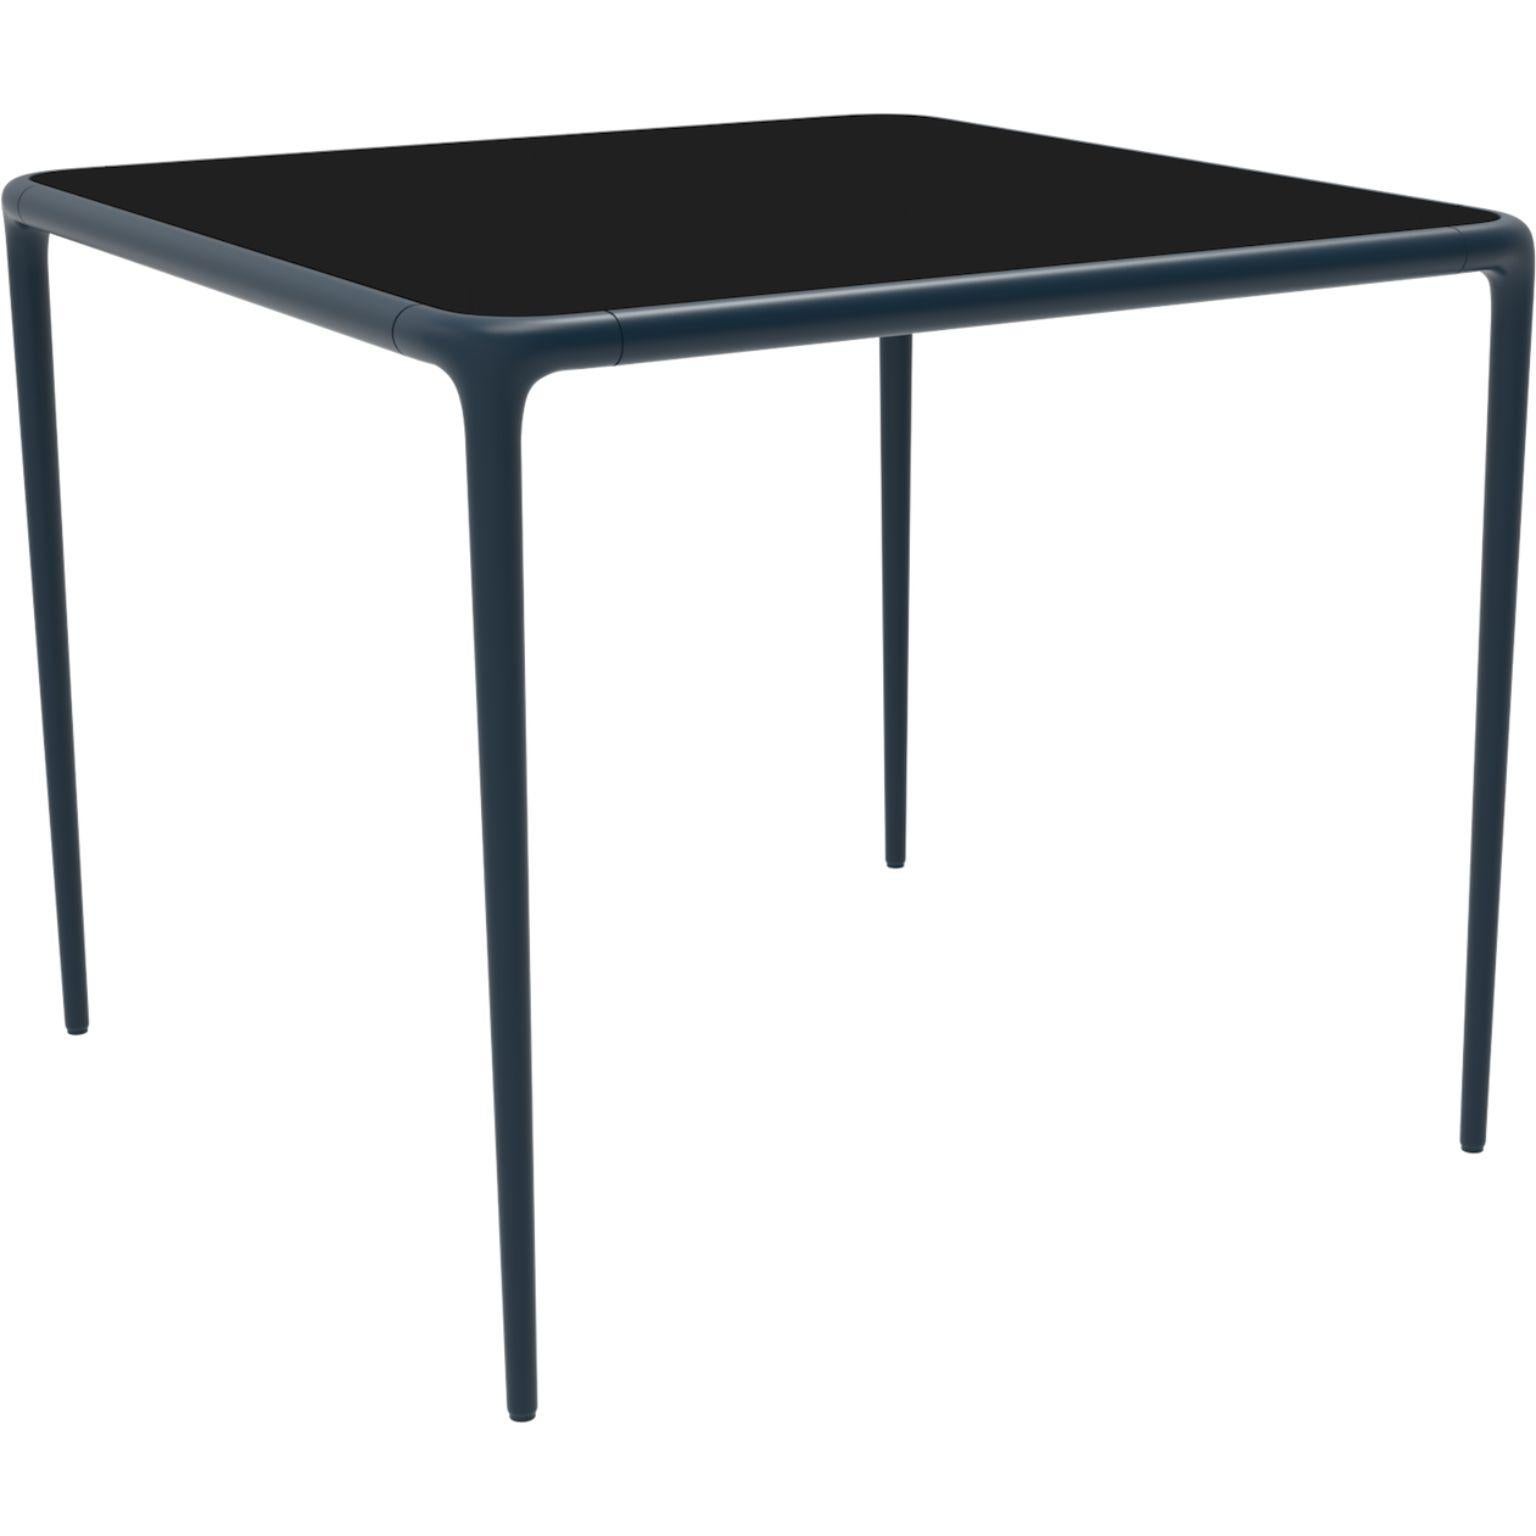 Xaloc Navy glass top table 90 by Mowee
Dimensions: D 90 x W 90 x H 74 cm
Material: Aluminum, tinted tempered glass top.
Also available in different aluminum colors and finishes (HPL Black Edge or Neolith).

 Xaloc synthesizes the lines of